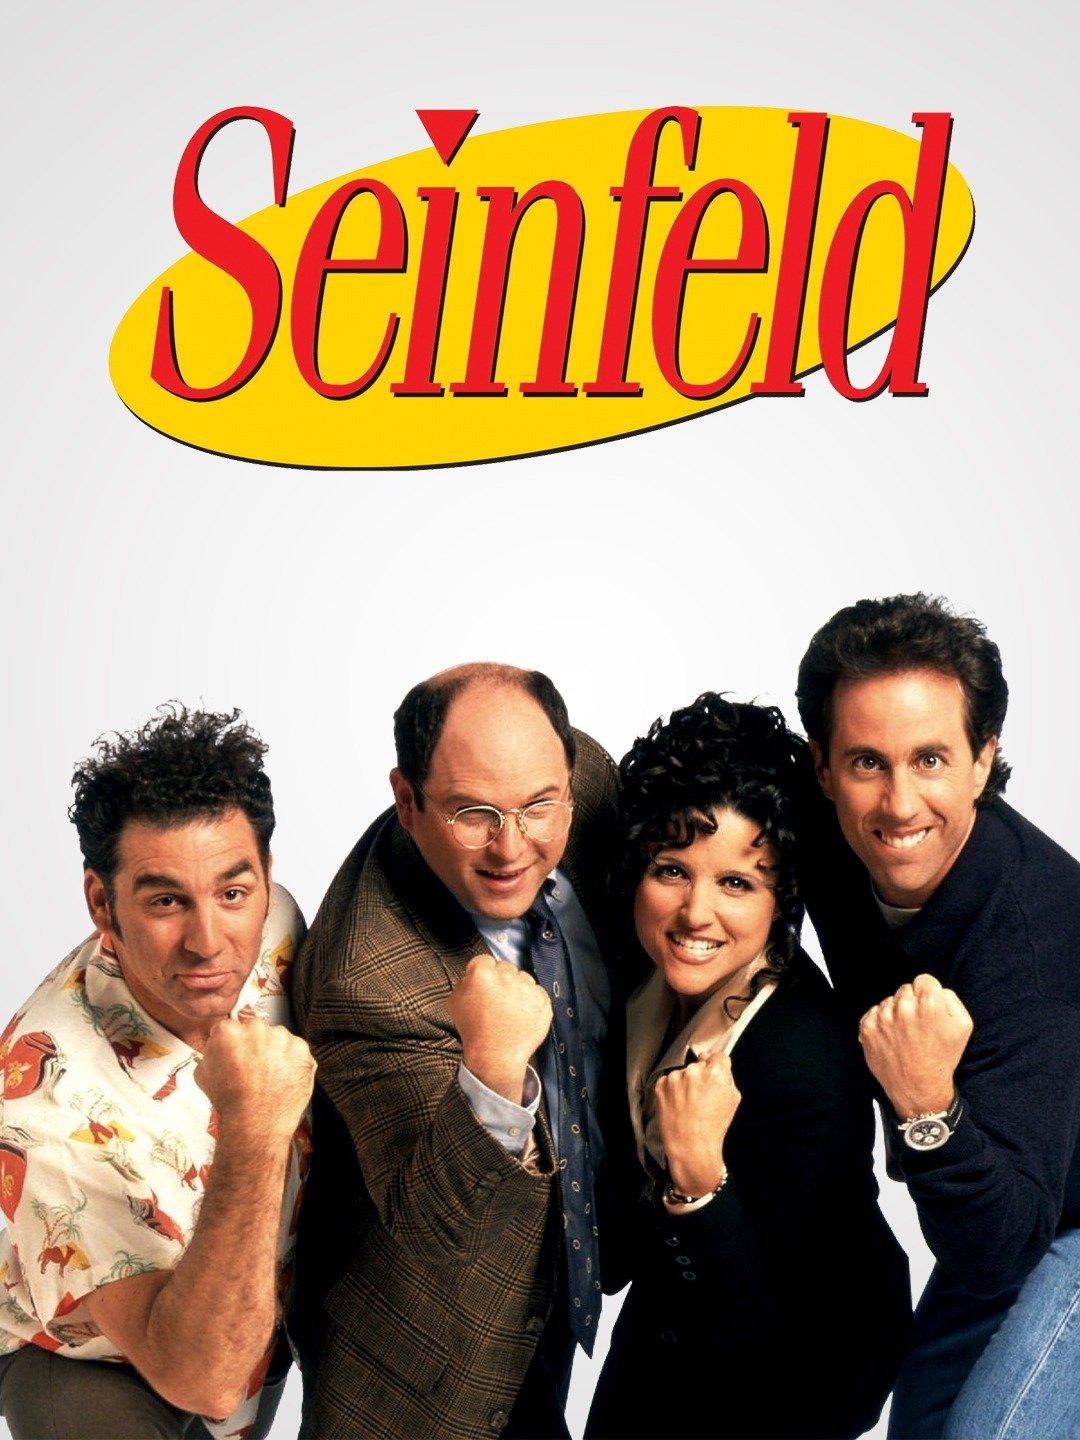 Jerry Seinfeld Hints at 'Seinfeld' Reunion - Something “Is Going To Happen”